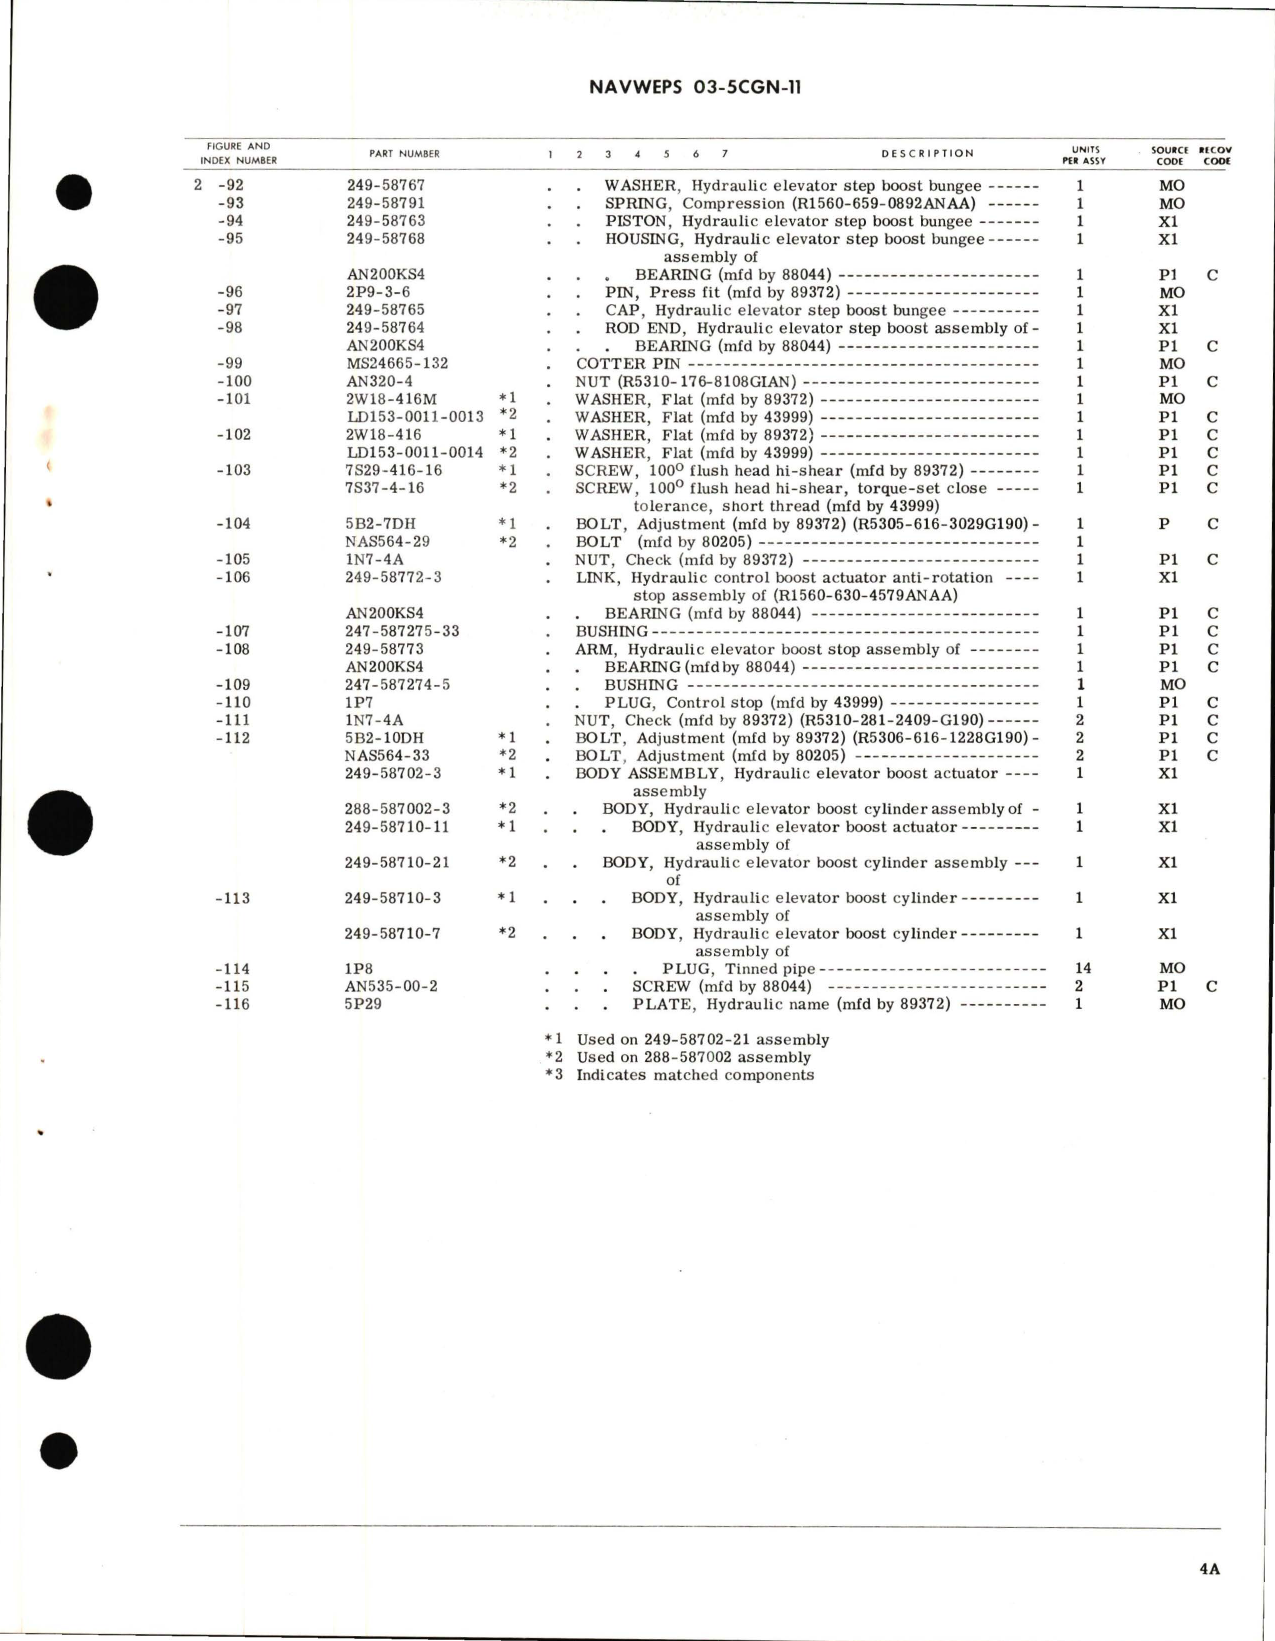 Sample page 7 from AirCorps Library document: Overhaul Instructions with Parts Breakdown for Hydraulic Elevator Boost Actuator Assembly - Part 249-58702-21 and 288-587002